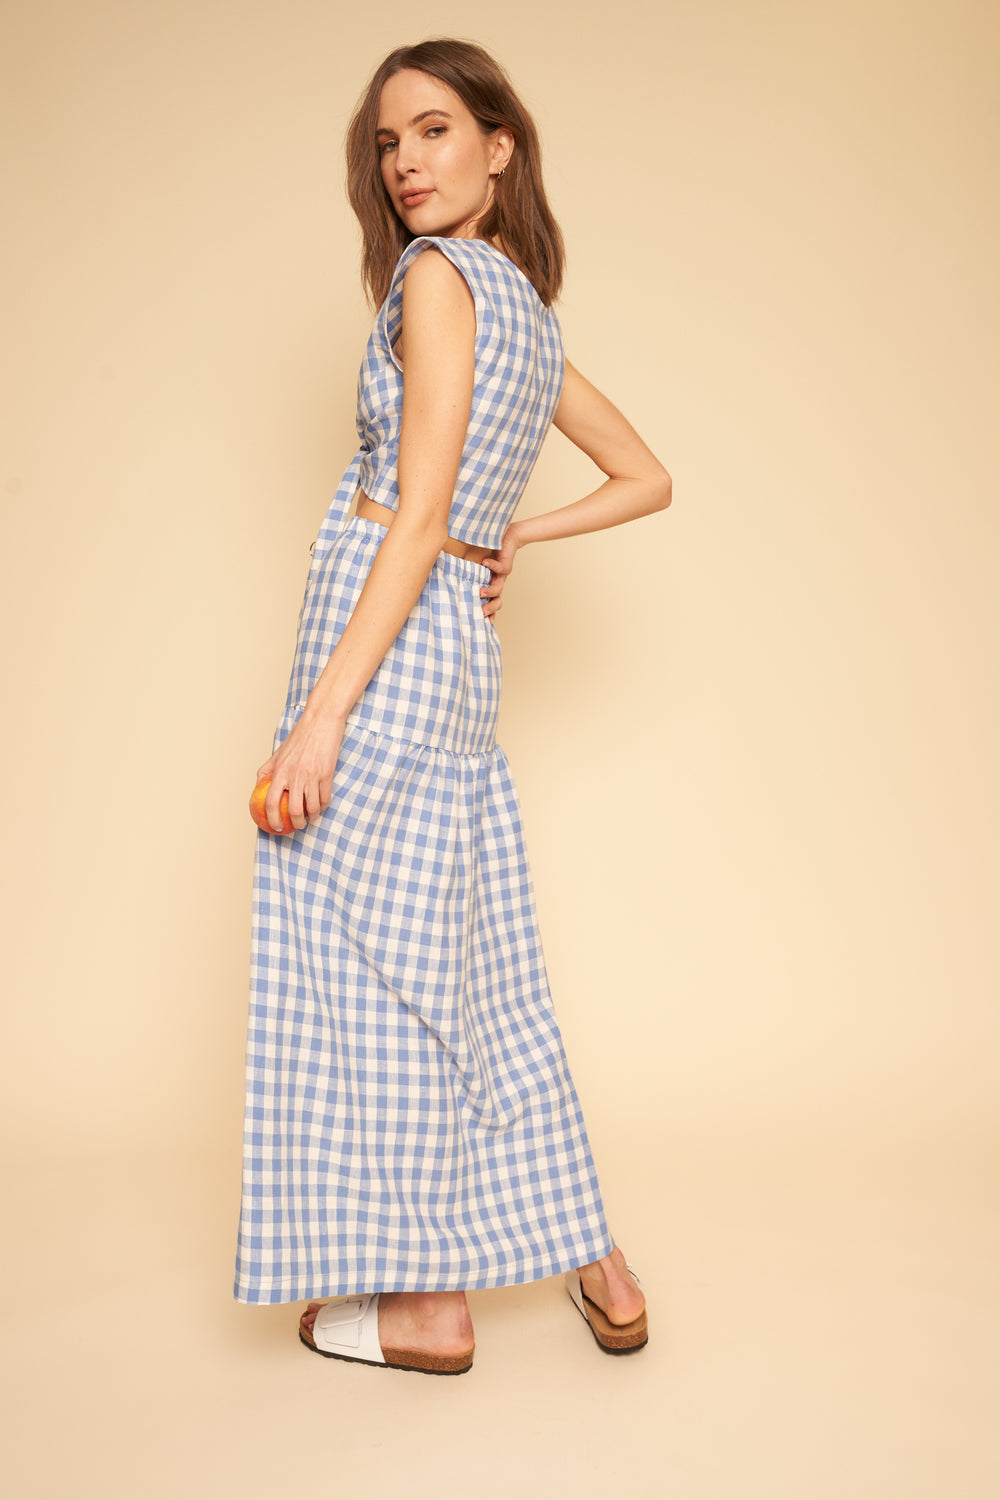 Valentina Top in Blue Gingham - Whimsy & Row